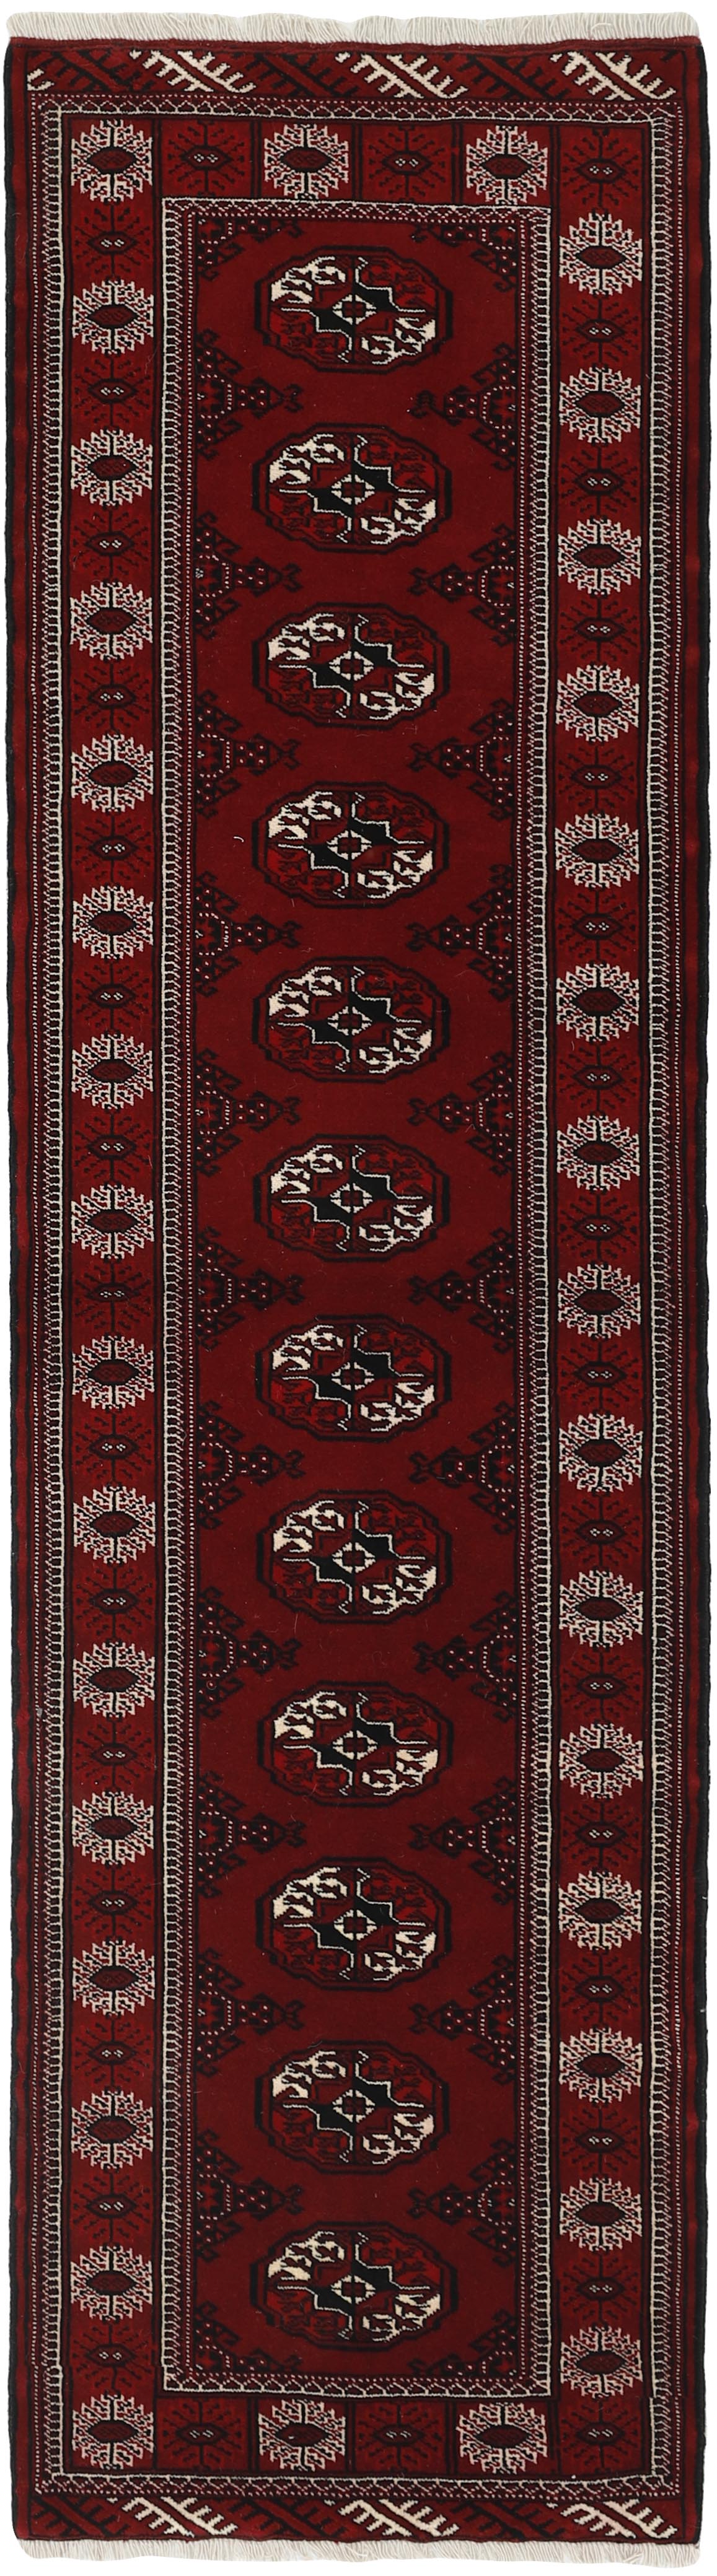 authentic red and black persian runner